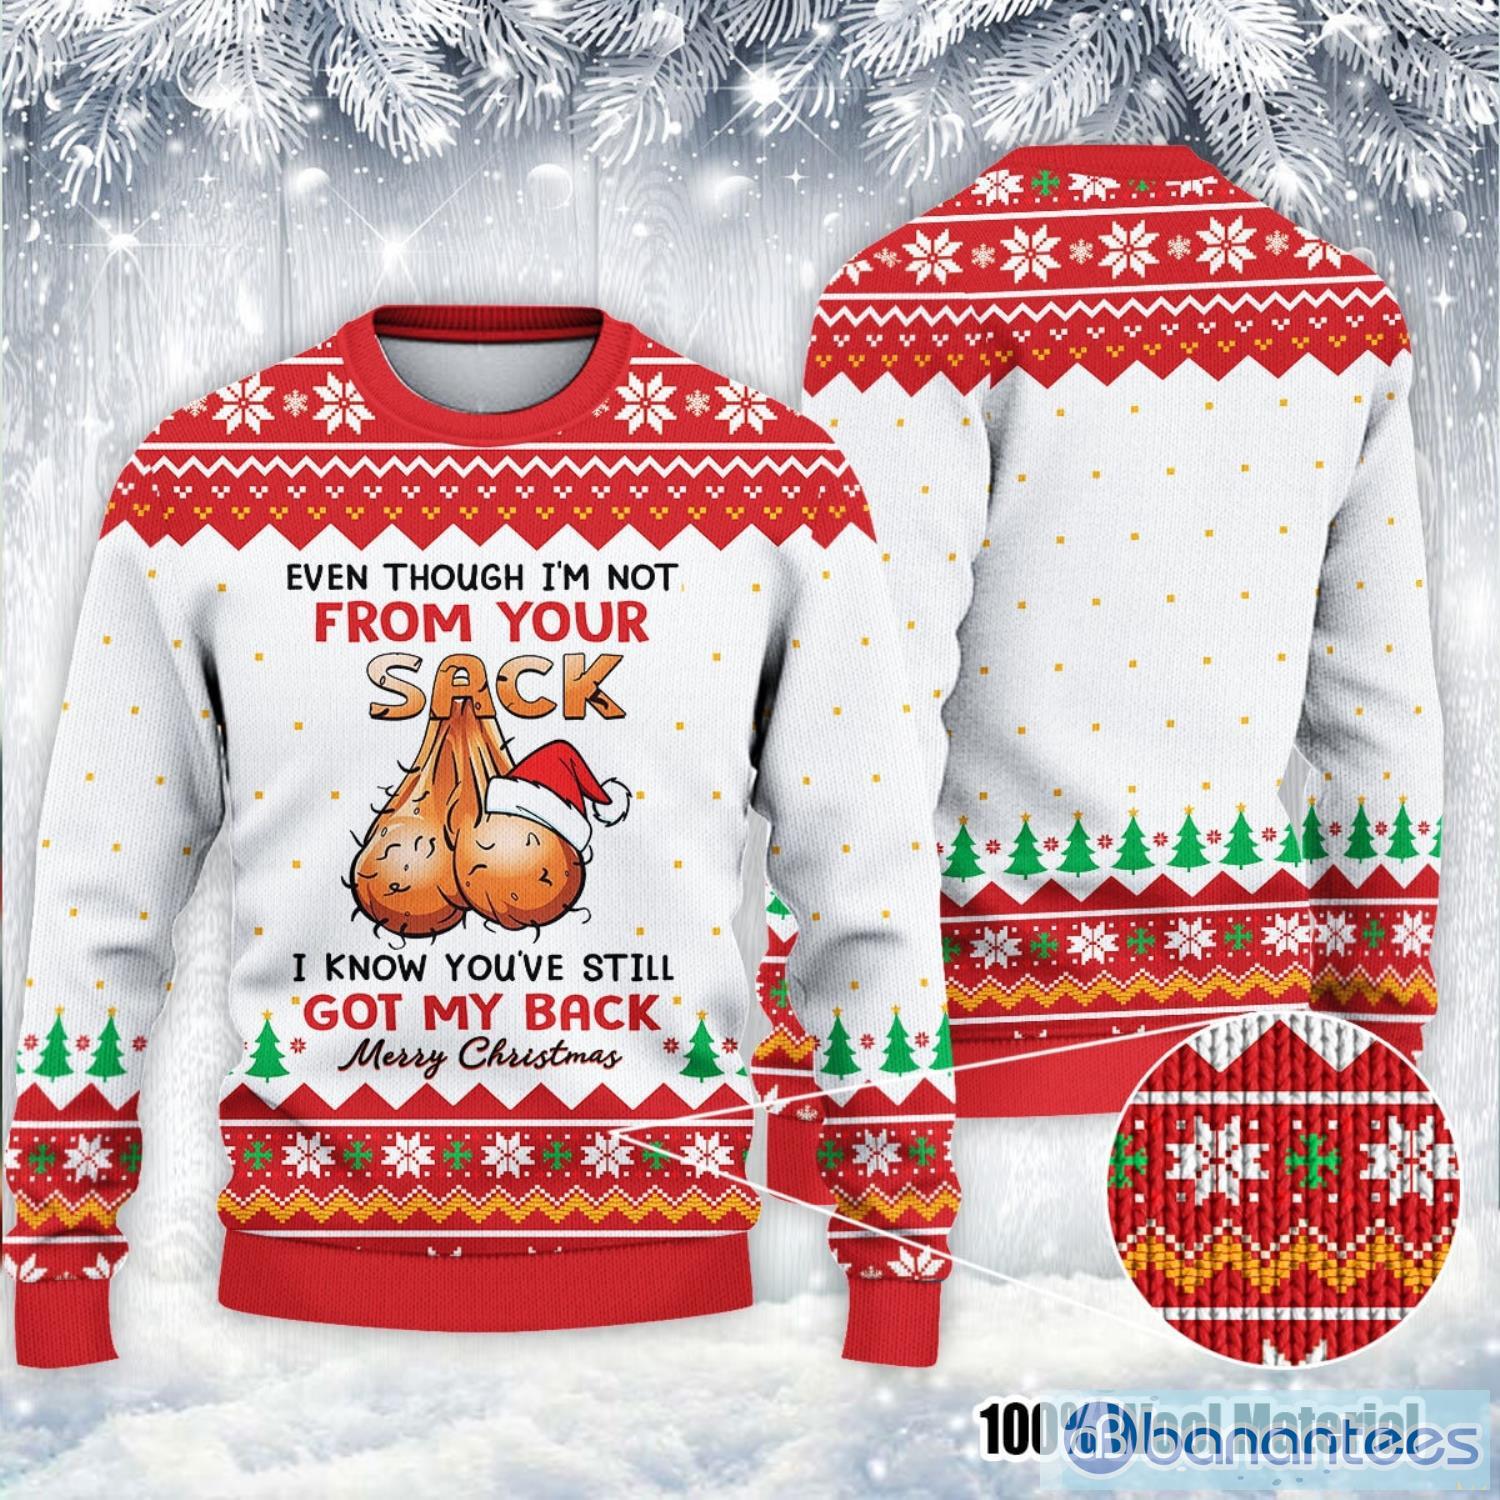 Even Though I'm Not From Your Sack You've Still Got My Back Christmas Ugly Christmas Sweater Product Photo 1